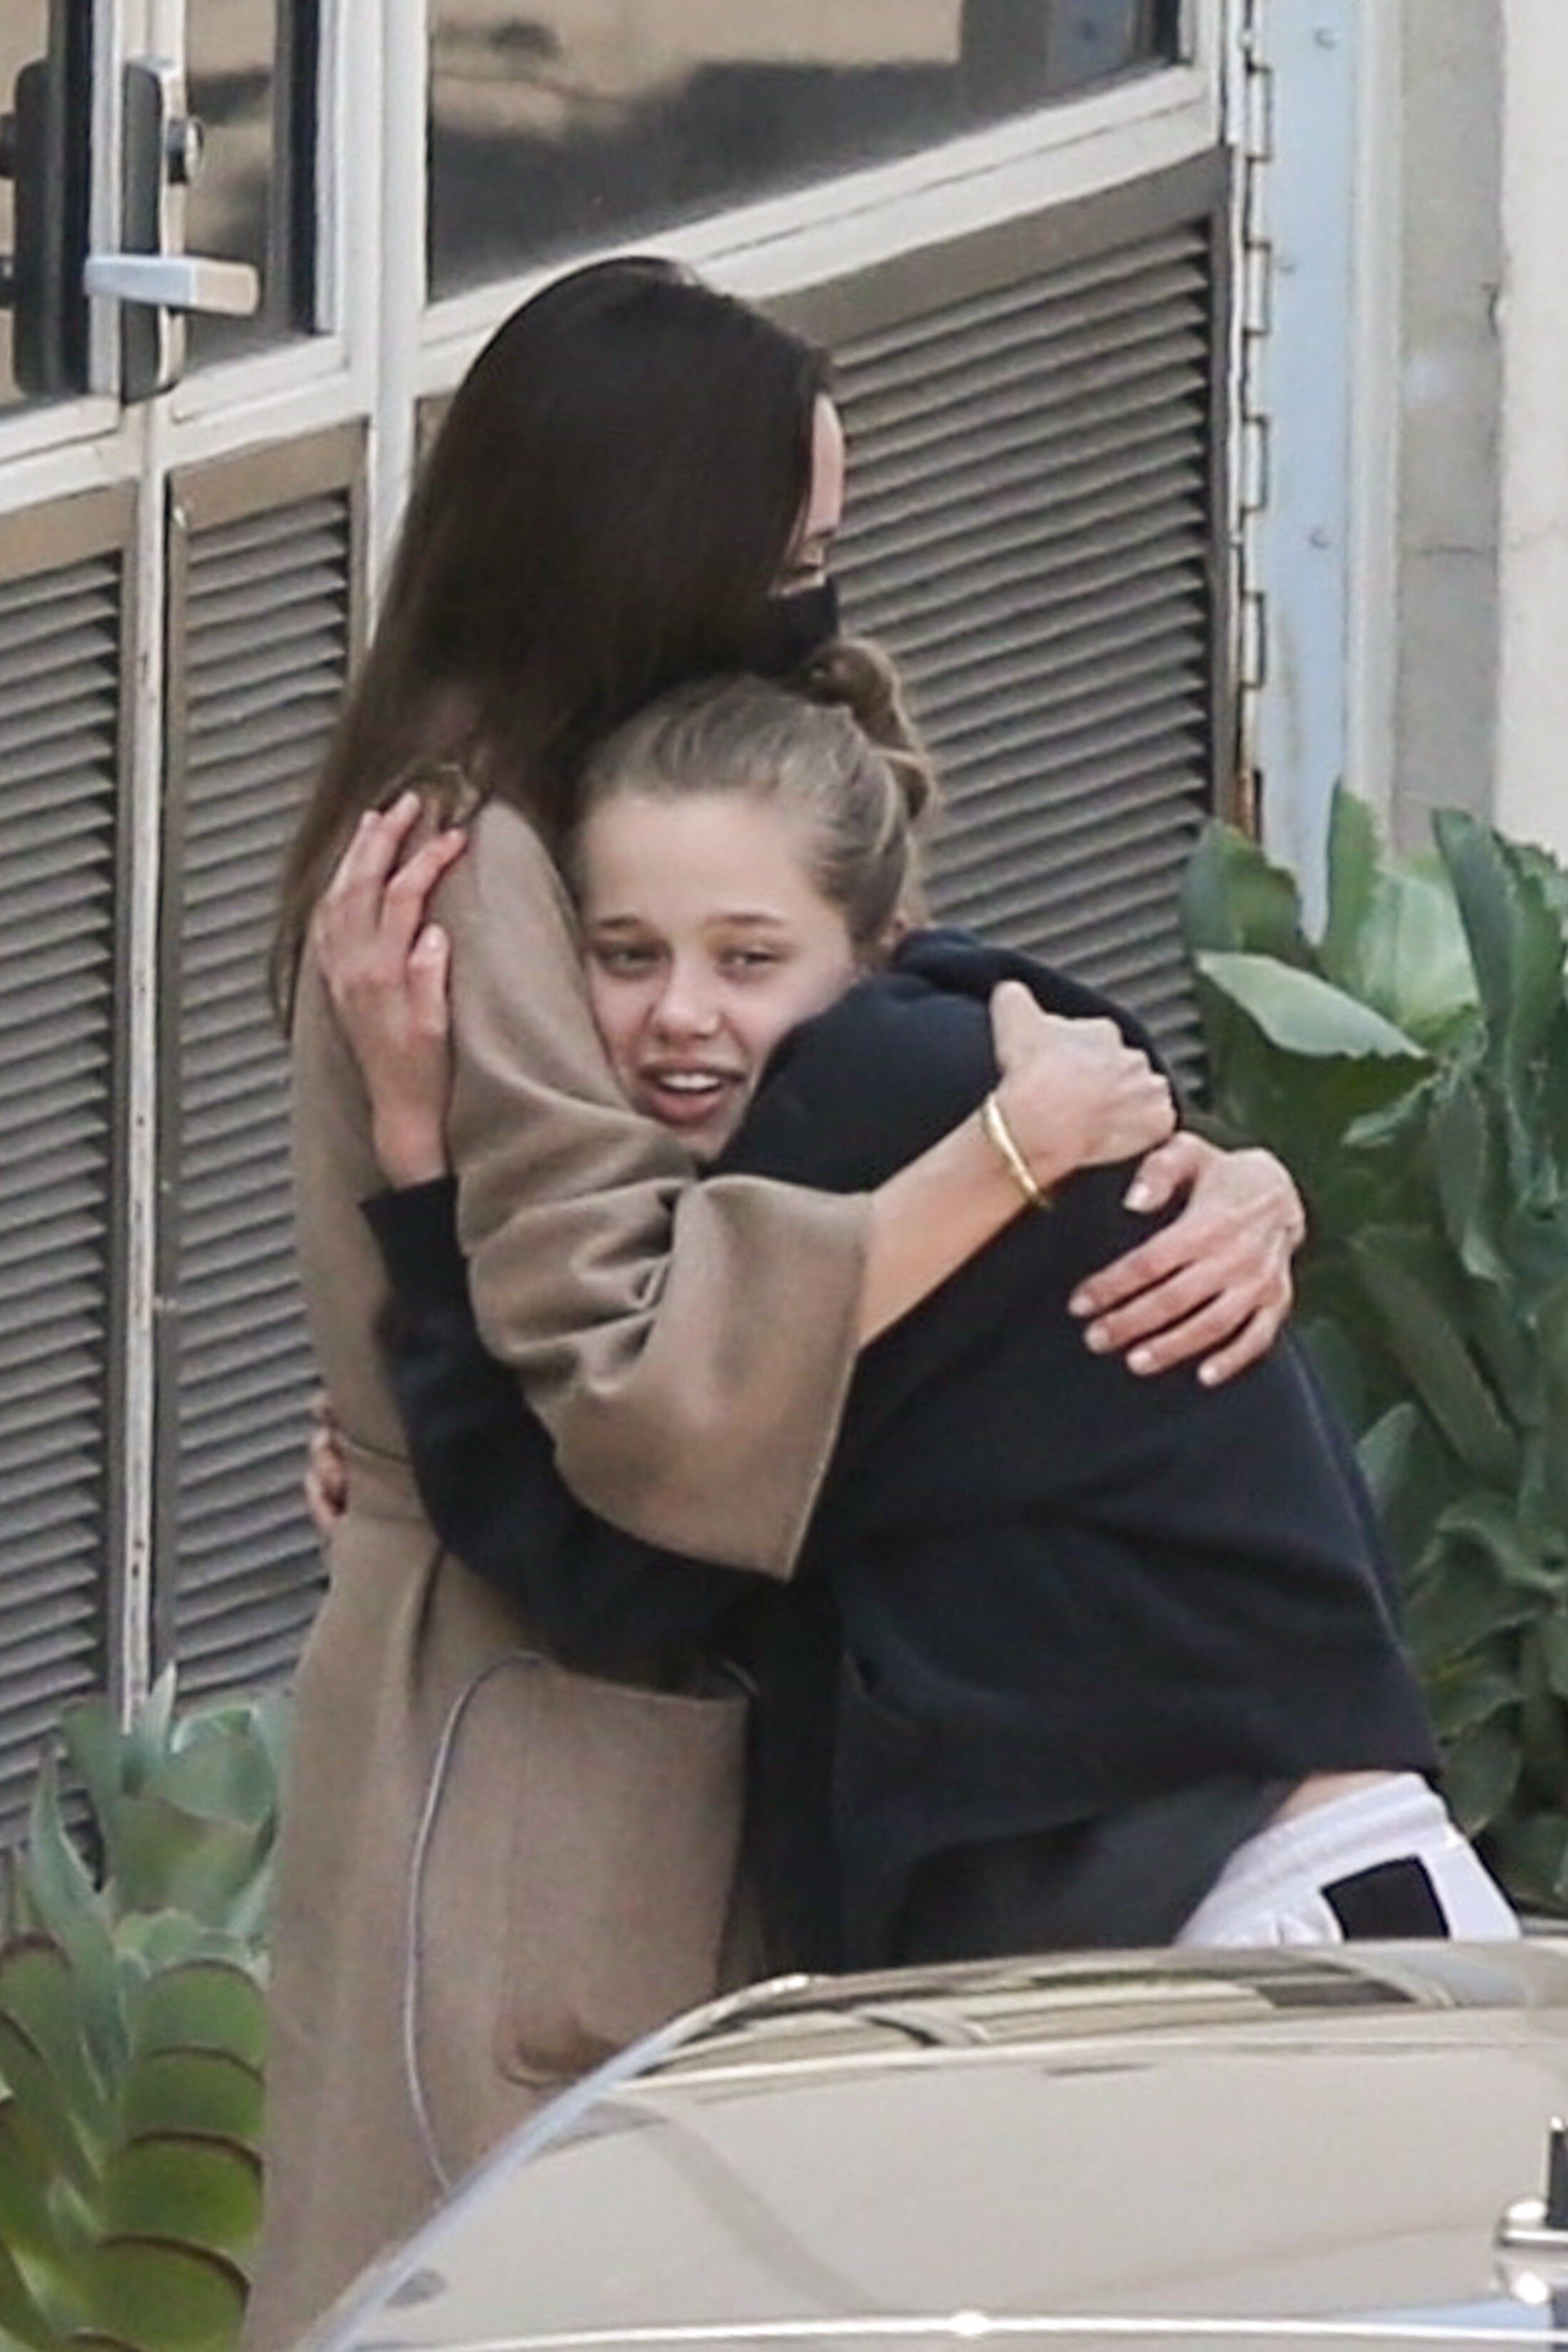 Angelina Jolie leaves a Burbank hospital and reunites with Shiloh Jolie-Pitt after a visit that was nearly six hours. Photo: Backgrid